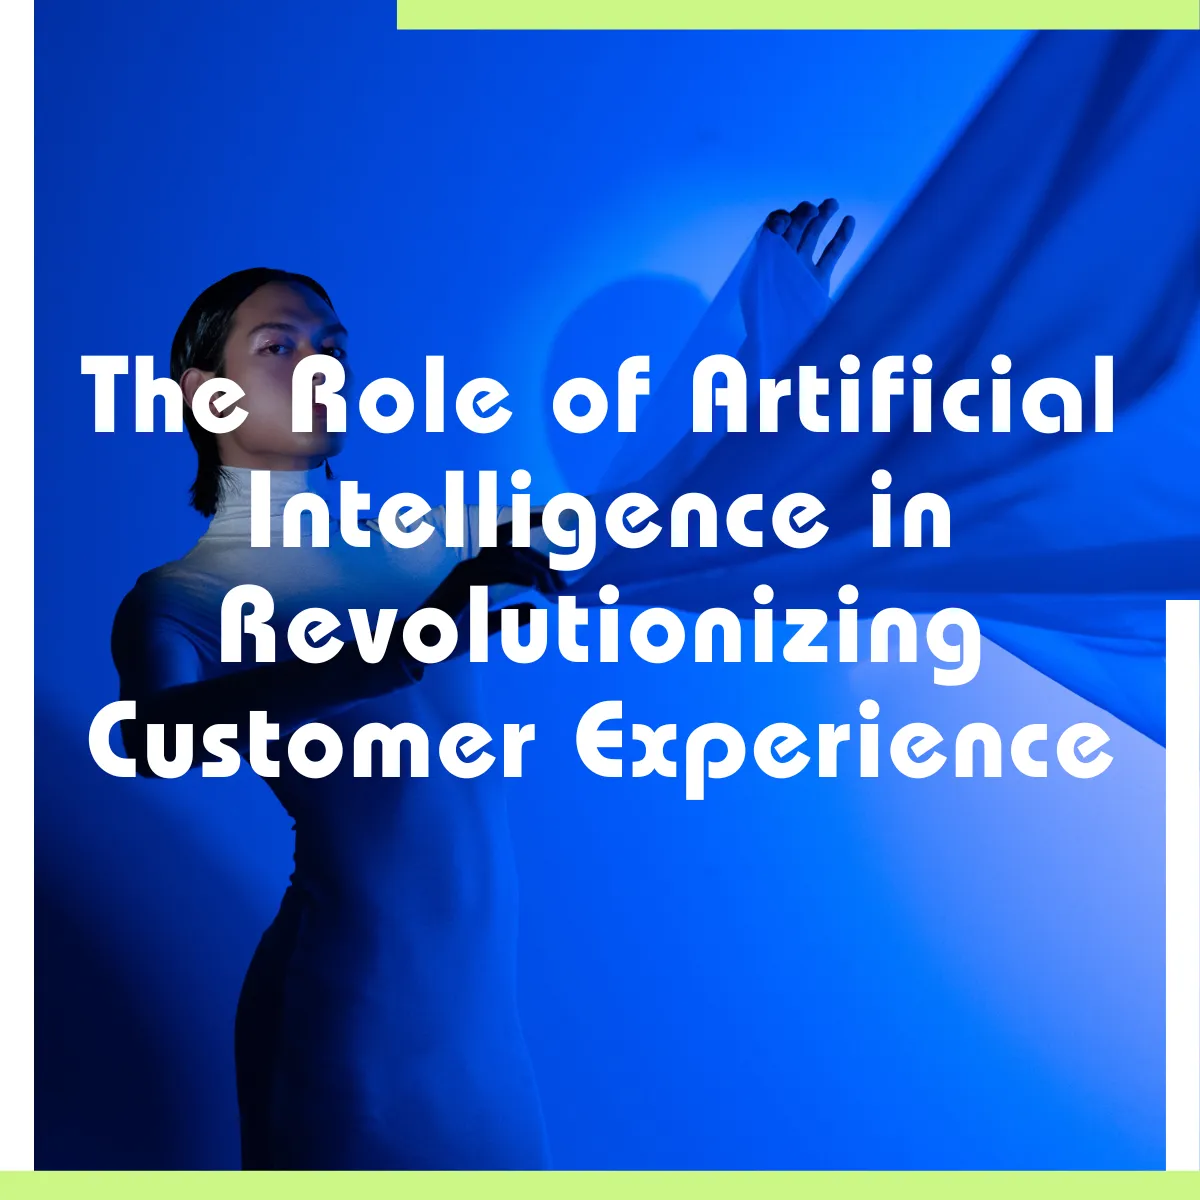 The Role of Artificial Intelligence in Revolutionizing Customer Experience